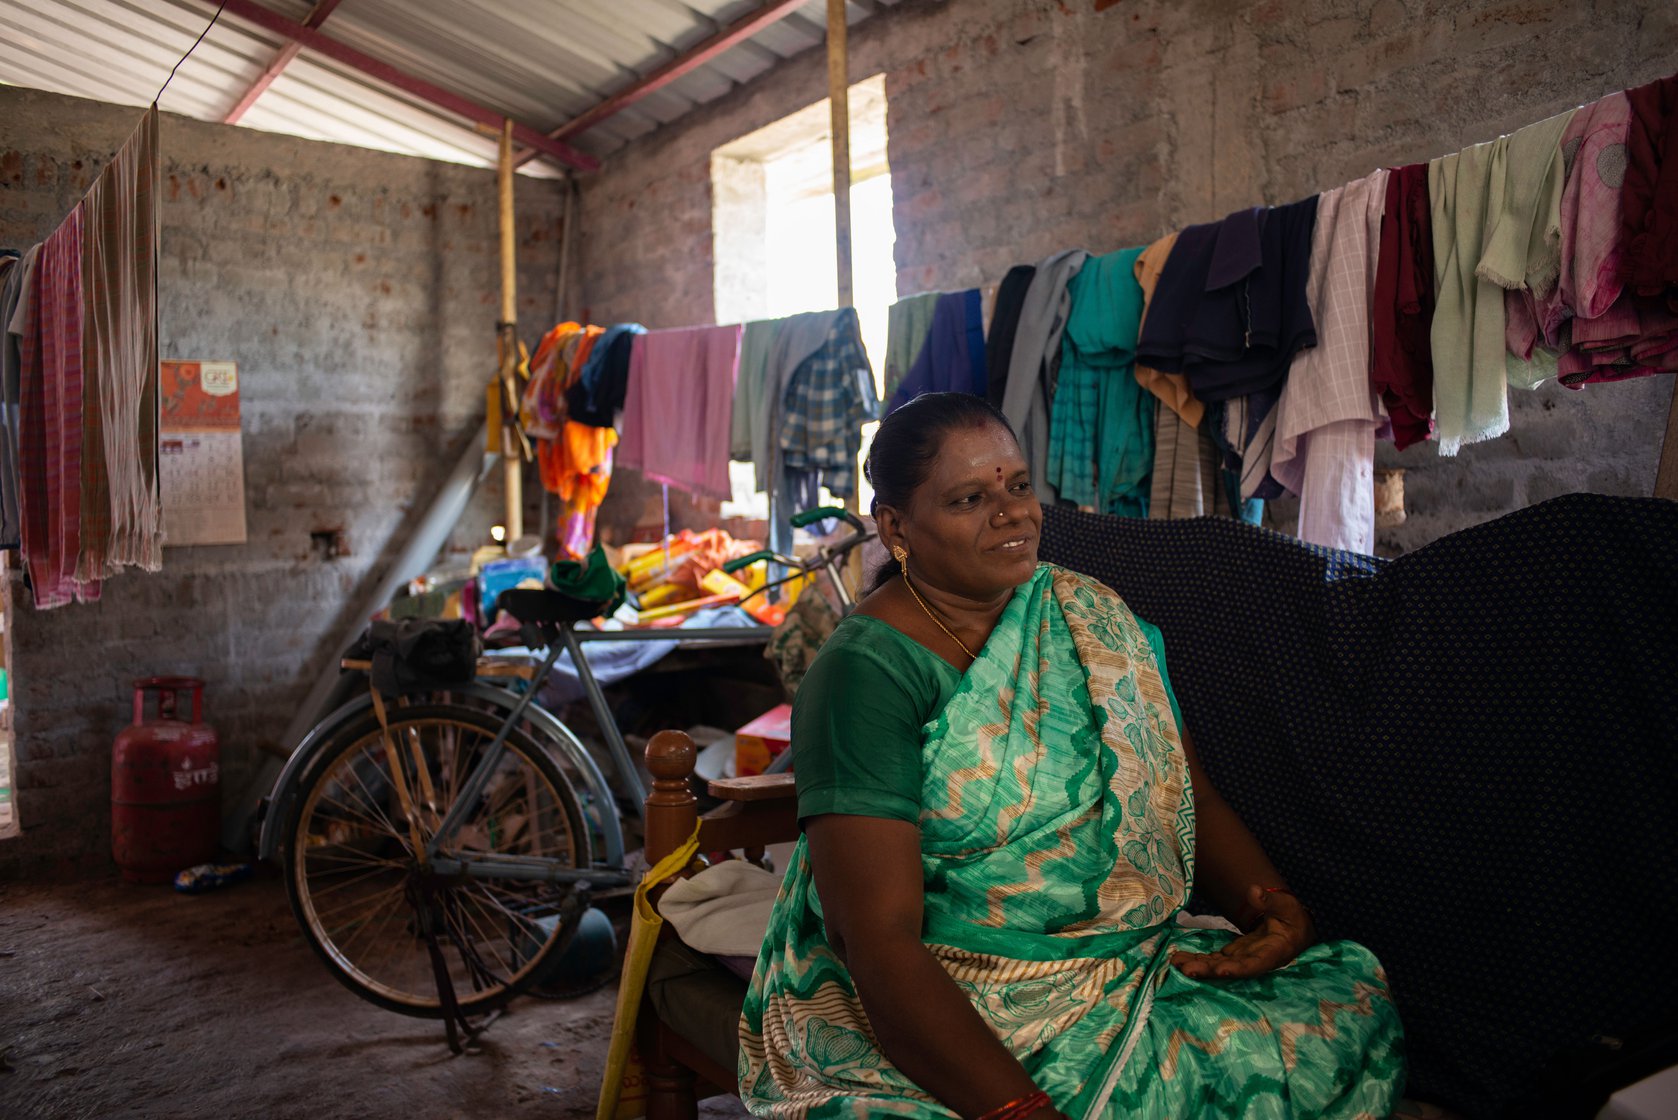 Selvi E. in her half-constructed house in Sembakkam village. She has travelled all over Chengalpattu taluk for more than 25 years, often with Shanthi, to help mentally ill people